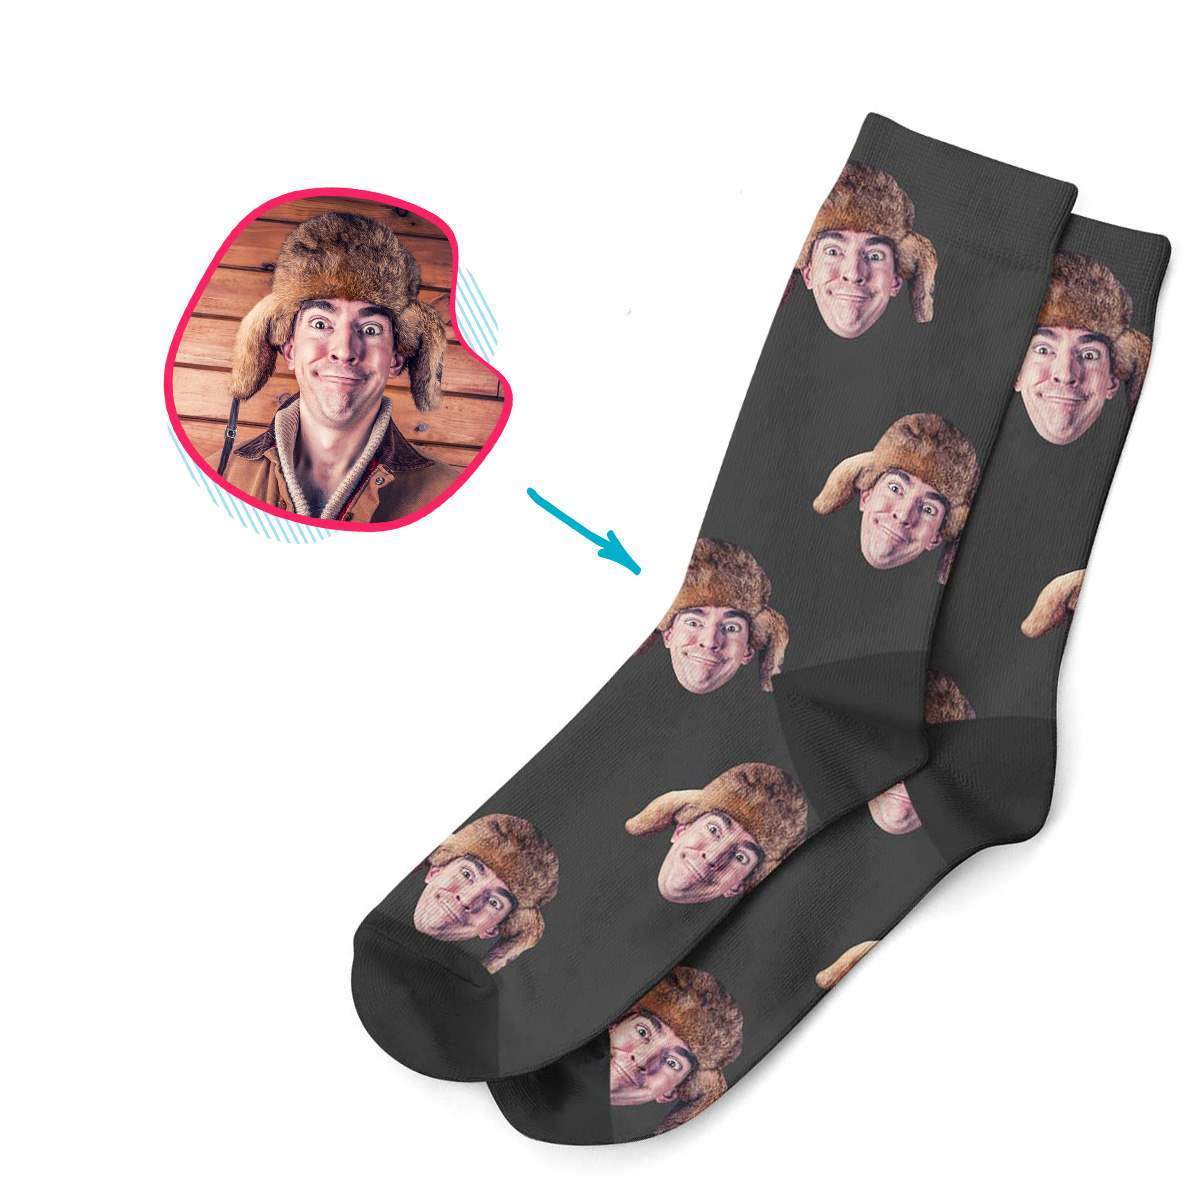 dark Blank design socks personalized with photo of face printed on them